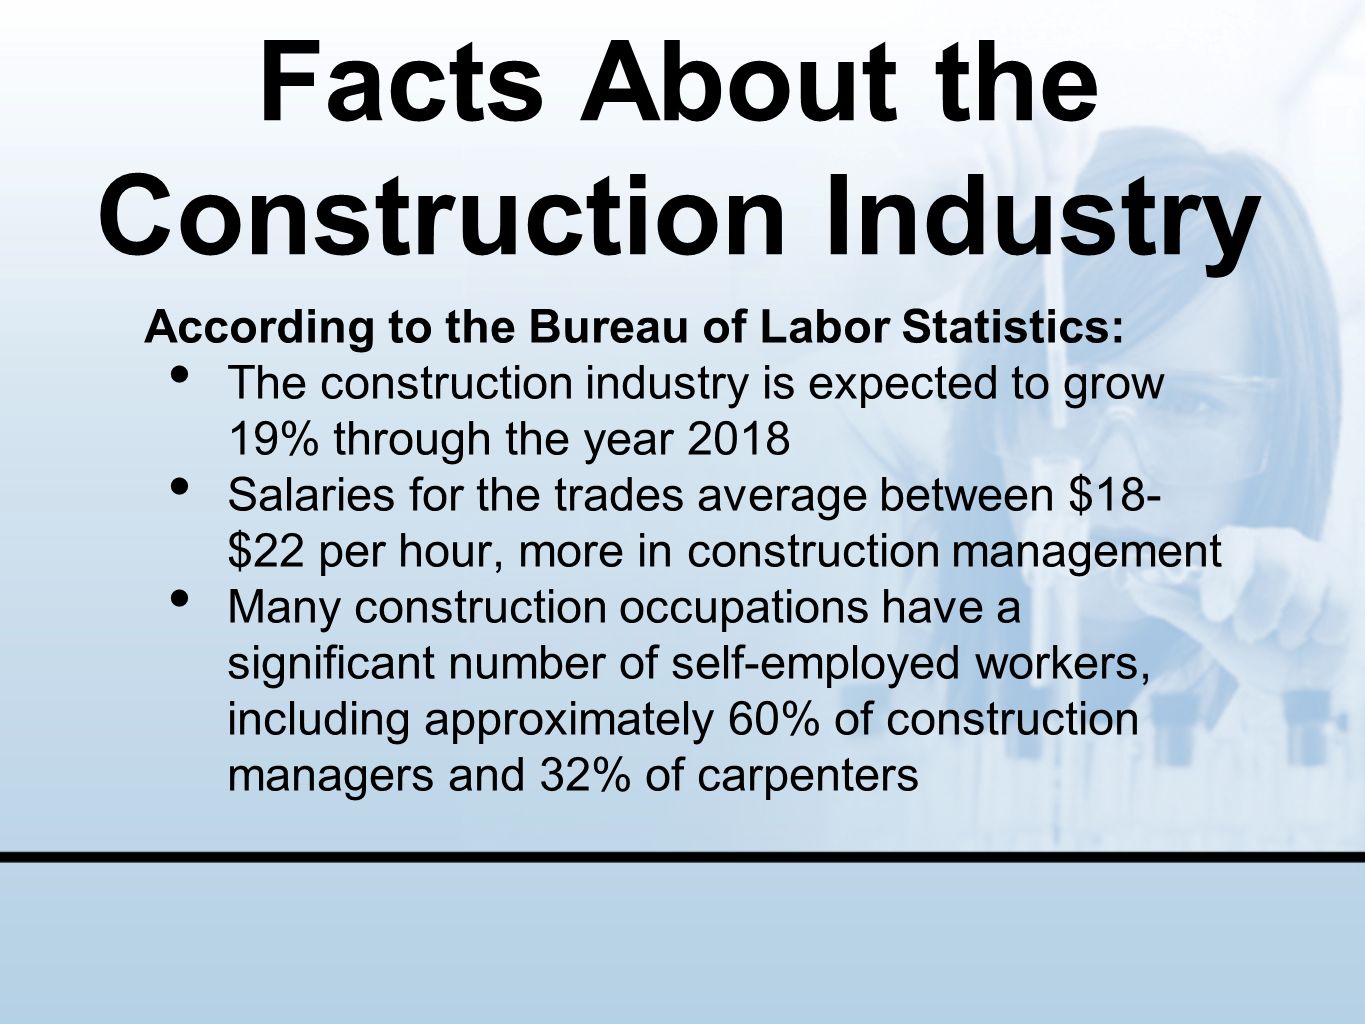 Facts About the Construction Industry According to the Bureau of Labor Statistics: The construction industry is expected to grow 19% through the year 2018 Salaries for the trades average between $18- $22 per hour, more in construction management Many construction occupations have a significant number of self-employed workers, including approximately 60% of construction managers and 32% of carpenters